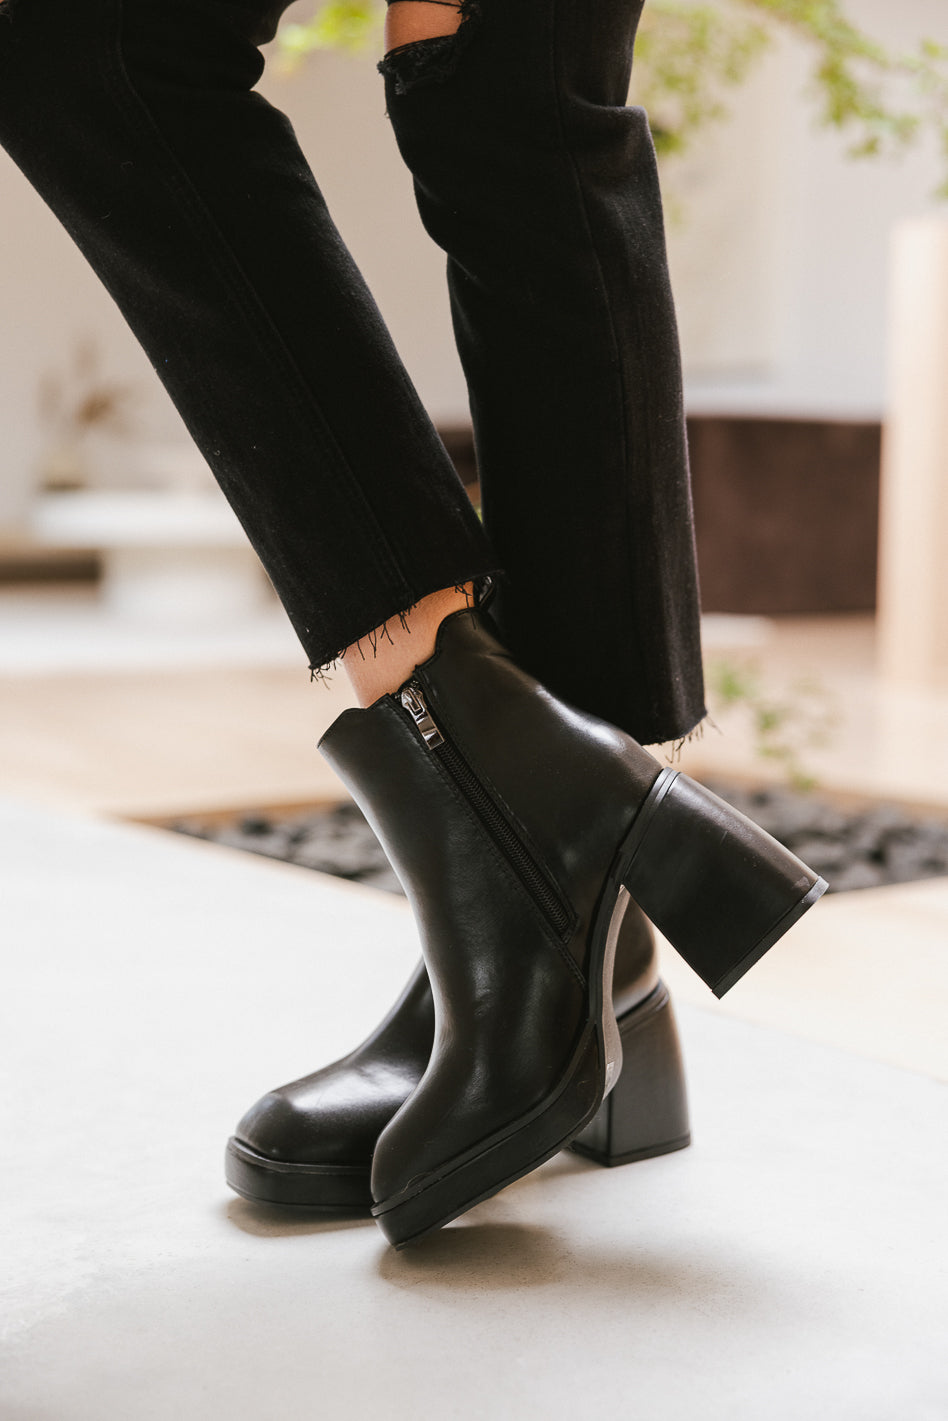 Fallon Heeled Boots in Off White - FINAL SALE | böhme